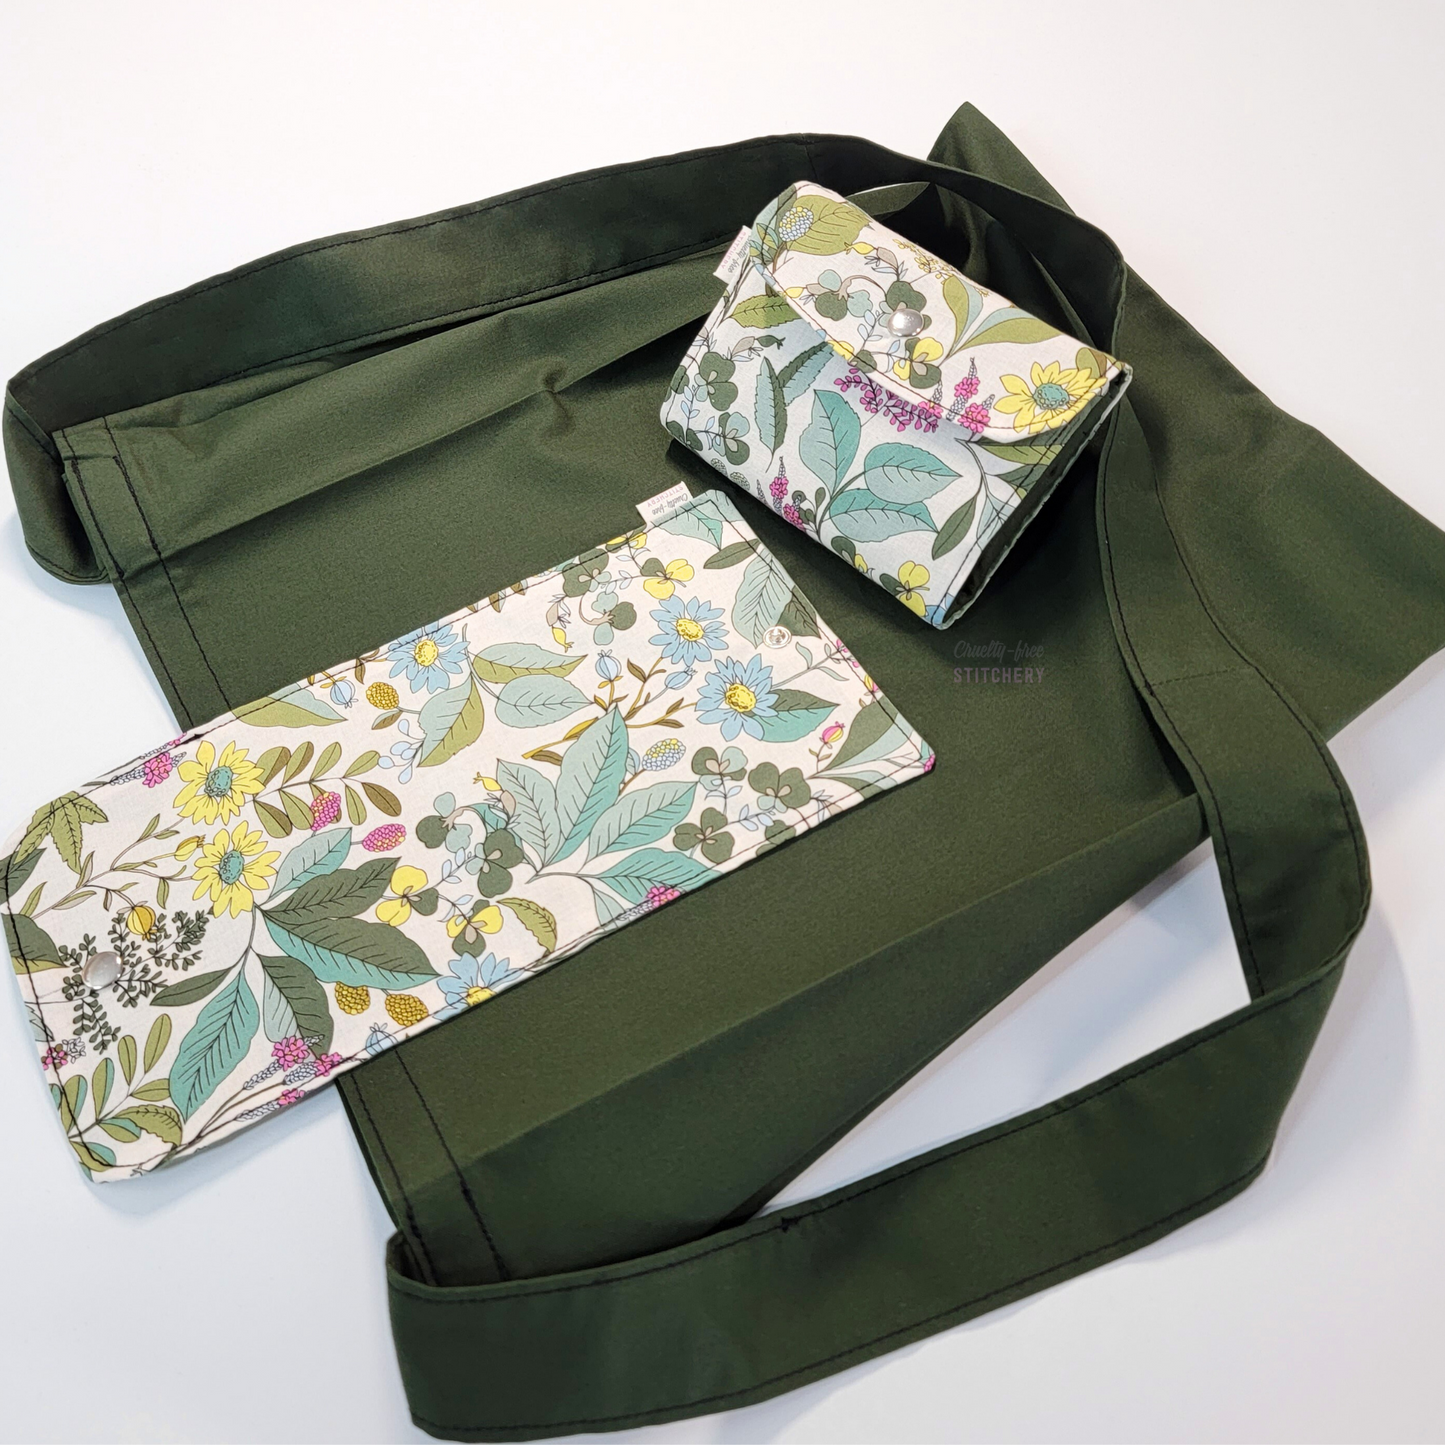 A solid dark forest green tote bag with a long strap and a light tan, sketched plants print flap. On top of the bag is another bag that has been folded up and snapped together like a wallet.